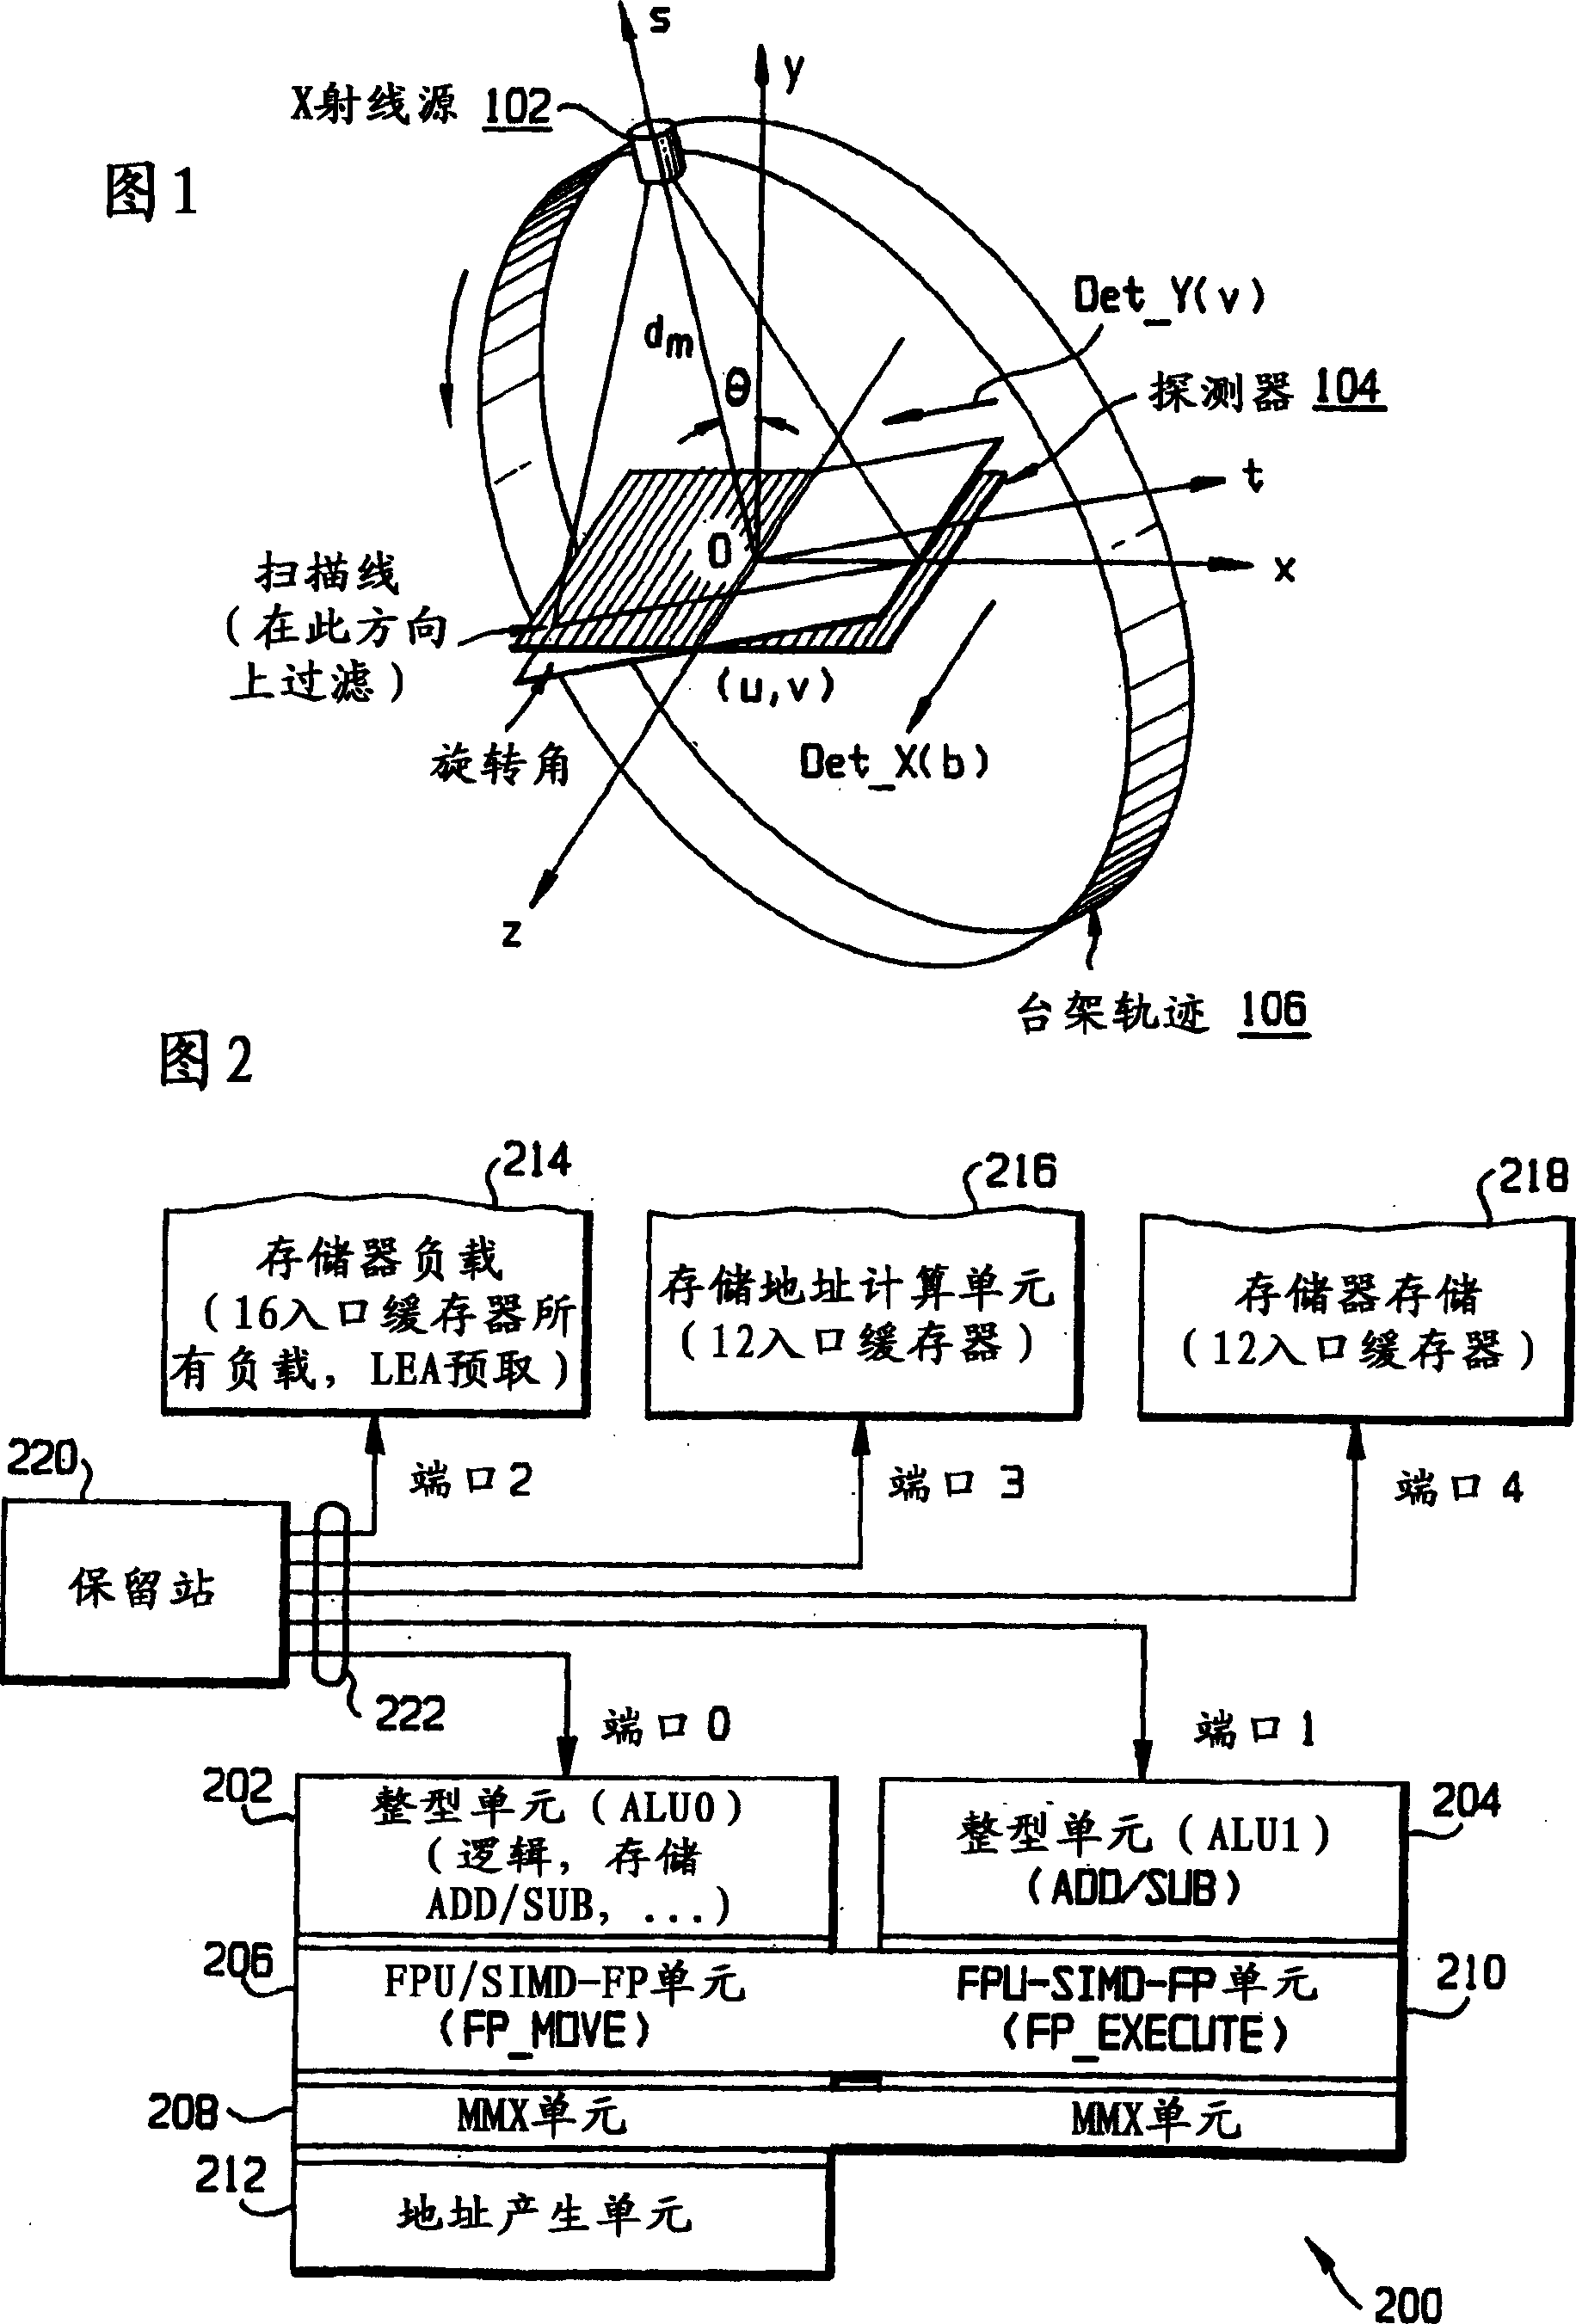 System and method for fast parallel cone-beam reconstruction using one or more microprocessor